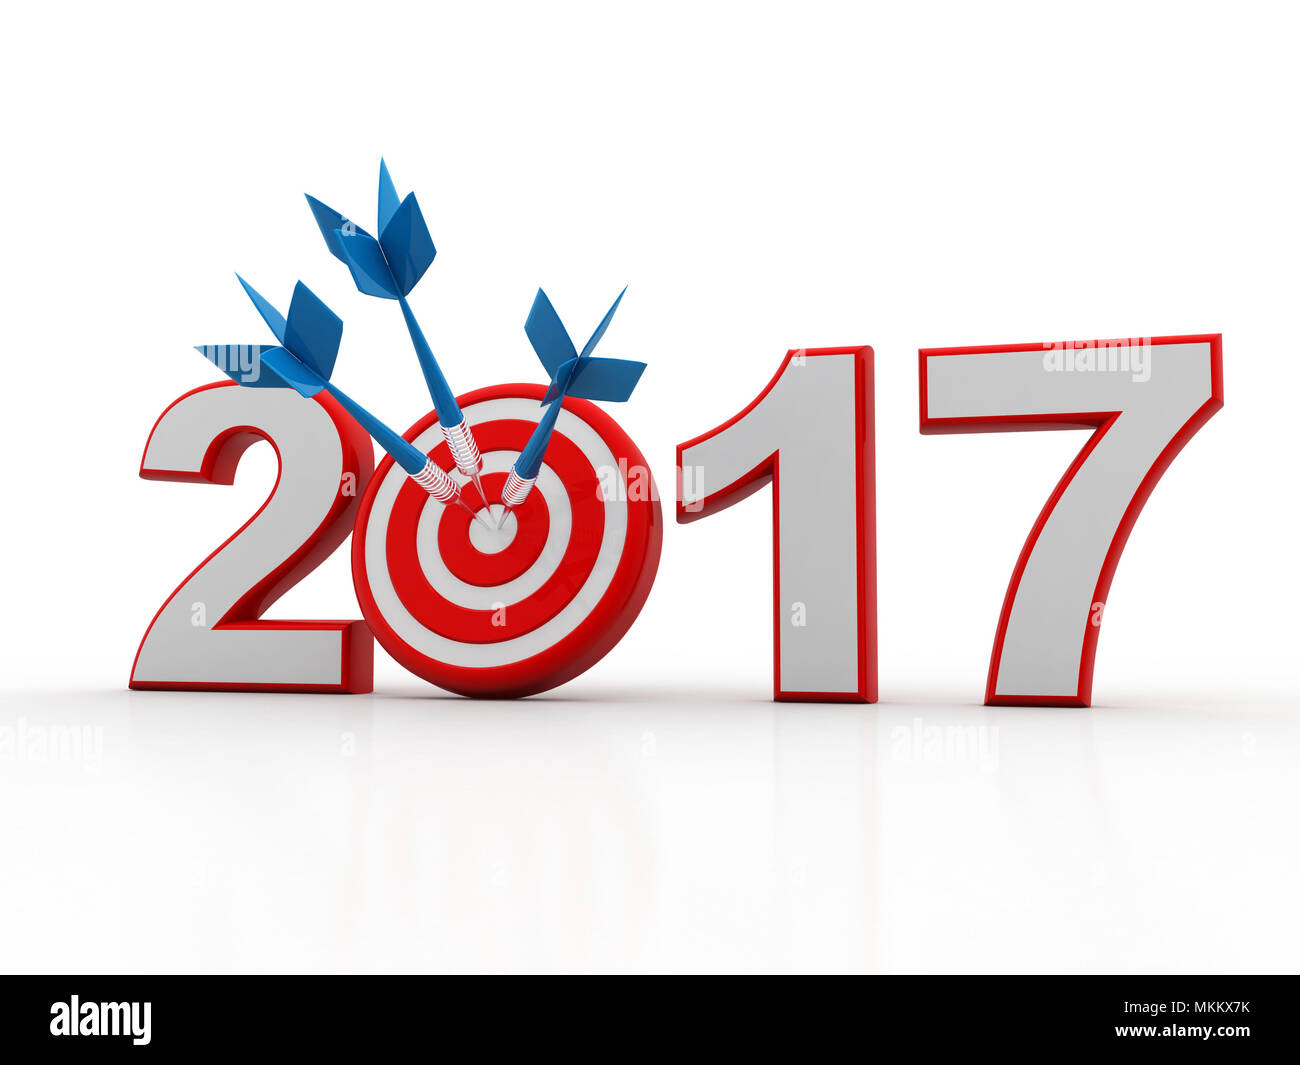 3d illustration of 2017 year sign and arrow with target Stock Photo